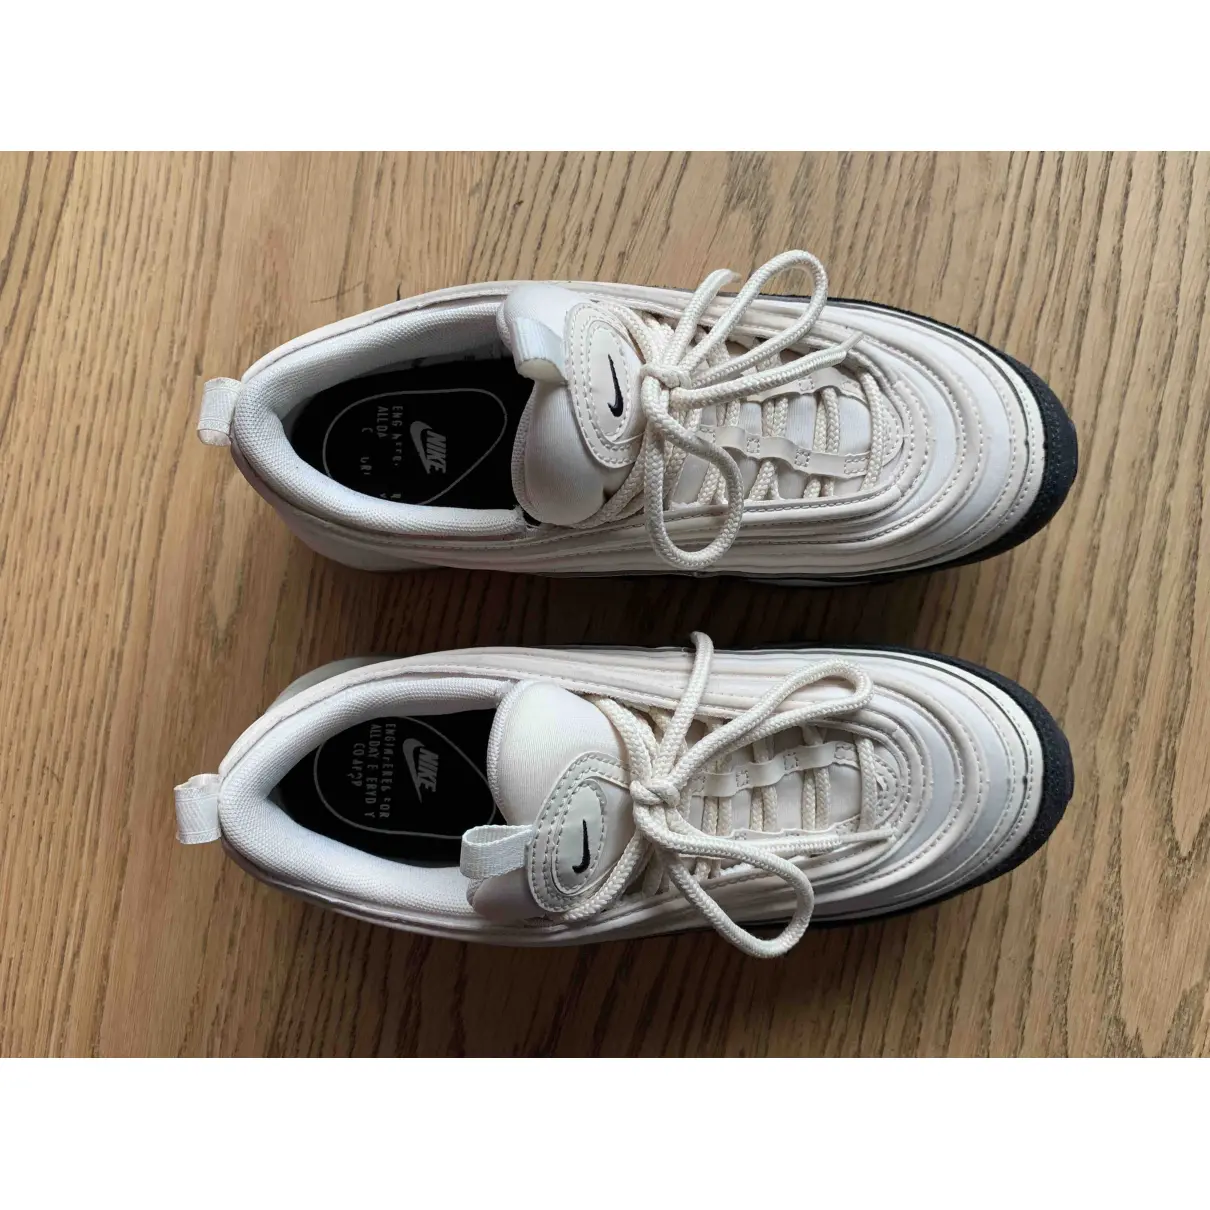 Buy Nike Air Max 97 leather trainers online